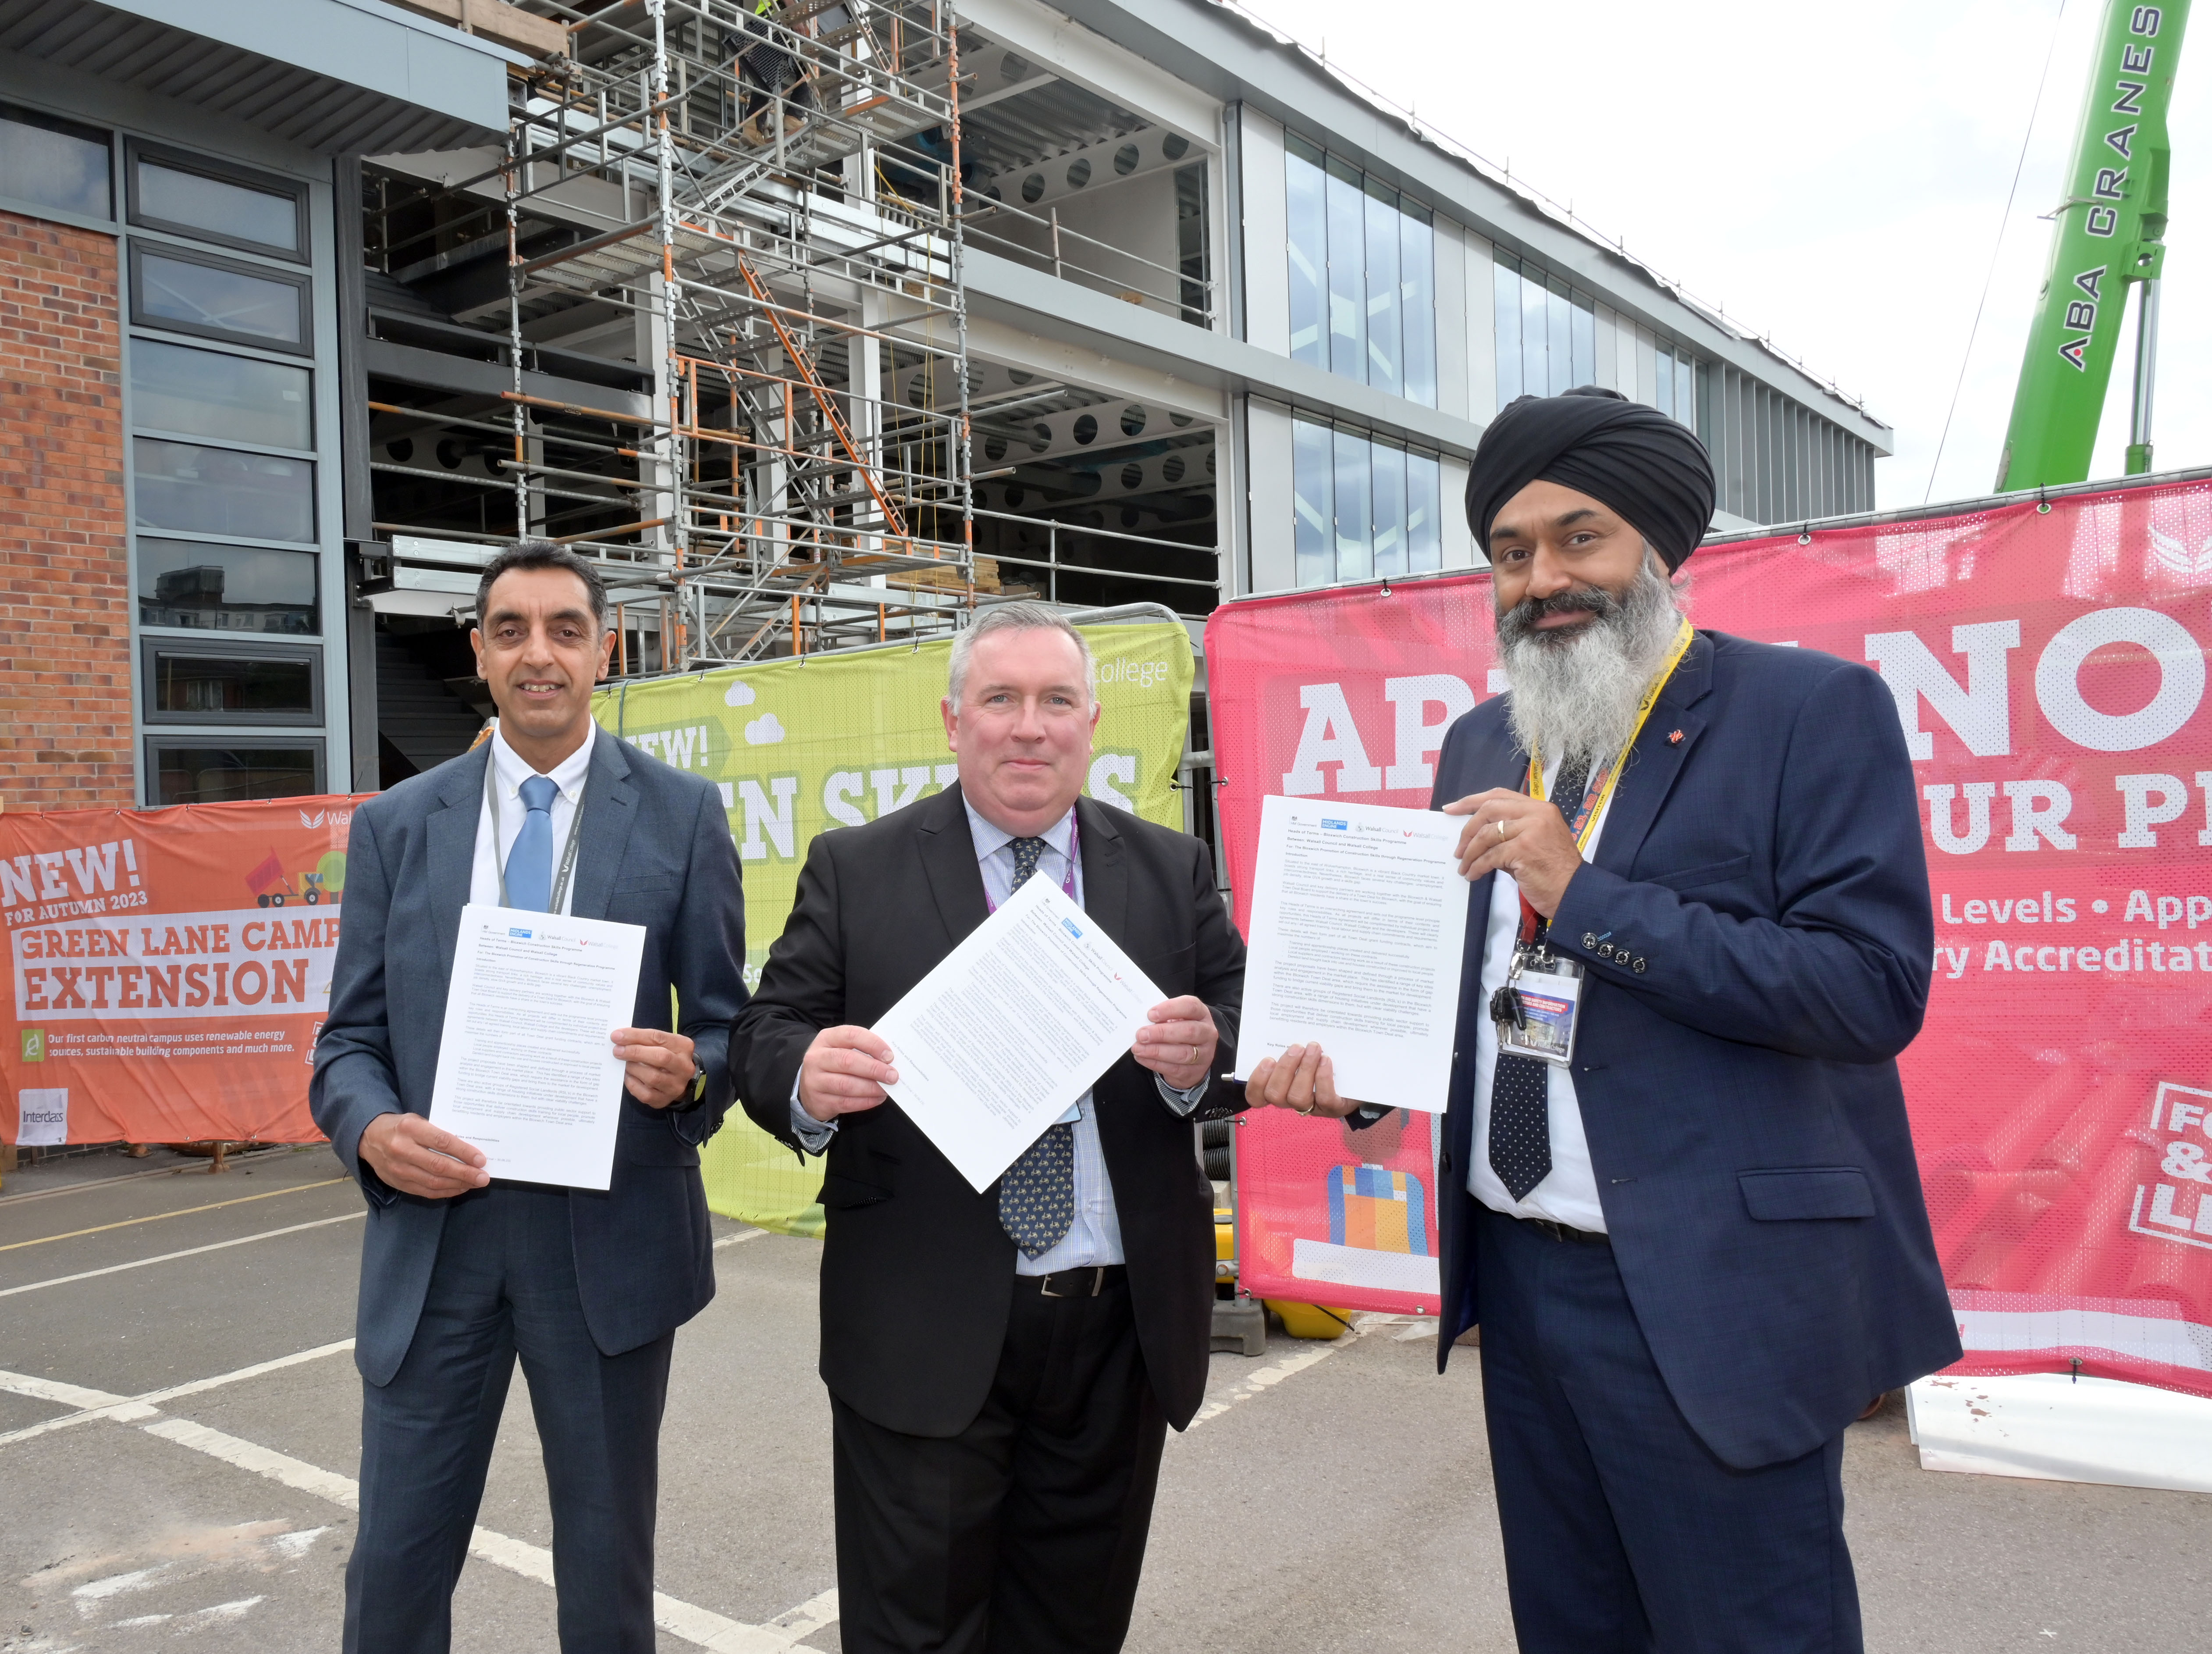 Left to right Jatinder Sharma, Councillor Andrew and Manjit Jhooty